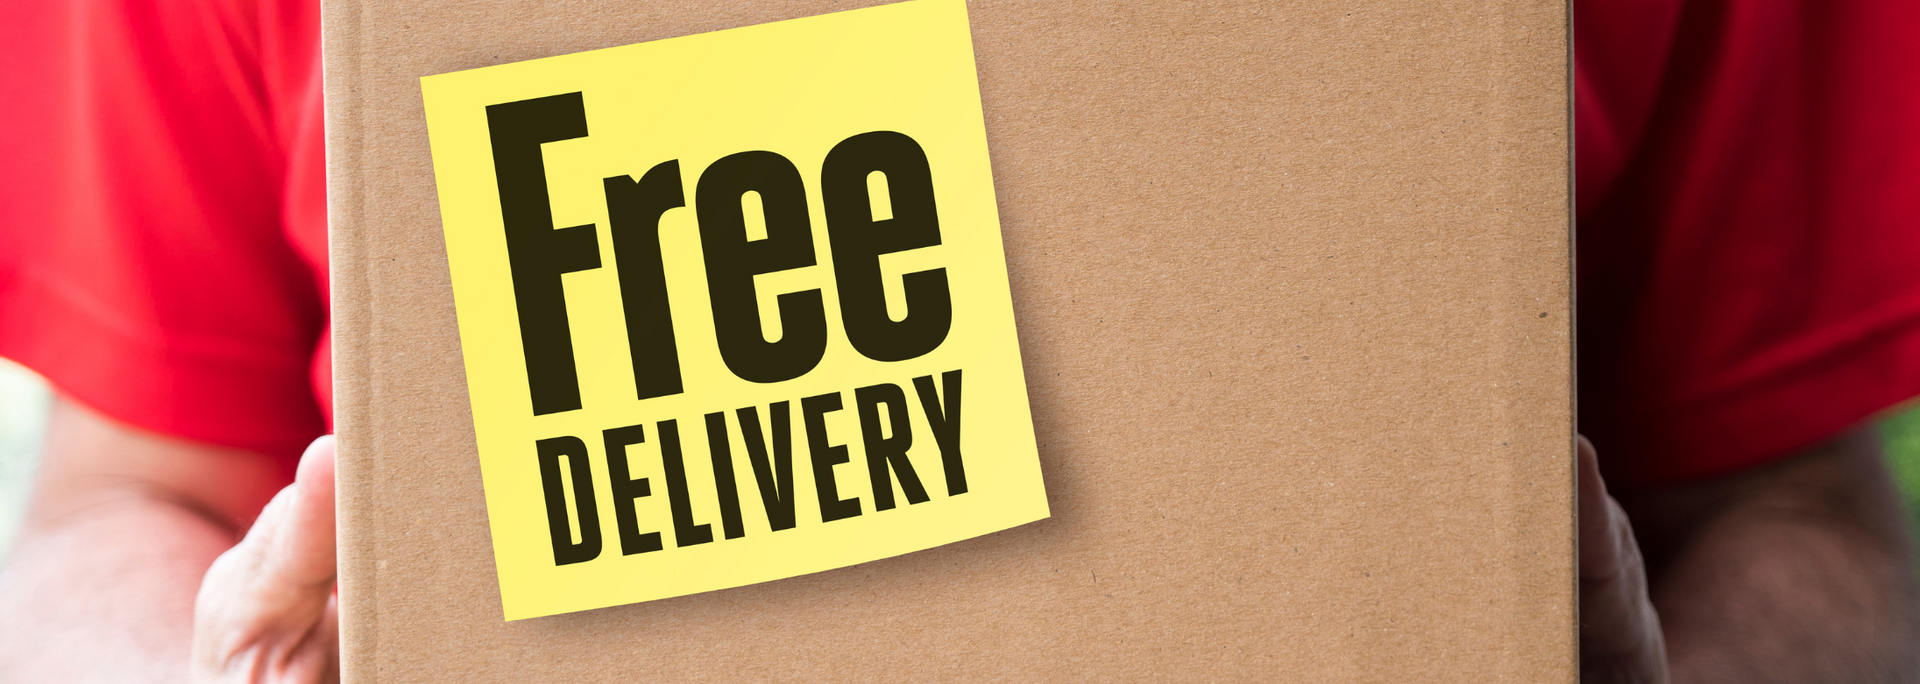 Picture representing free delivery.